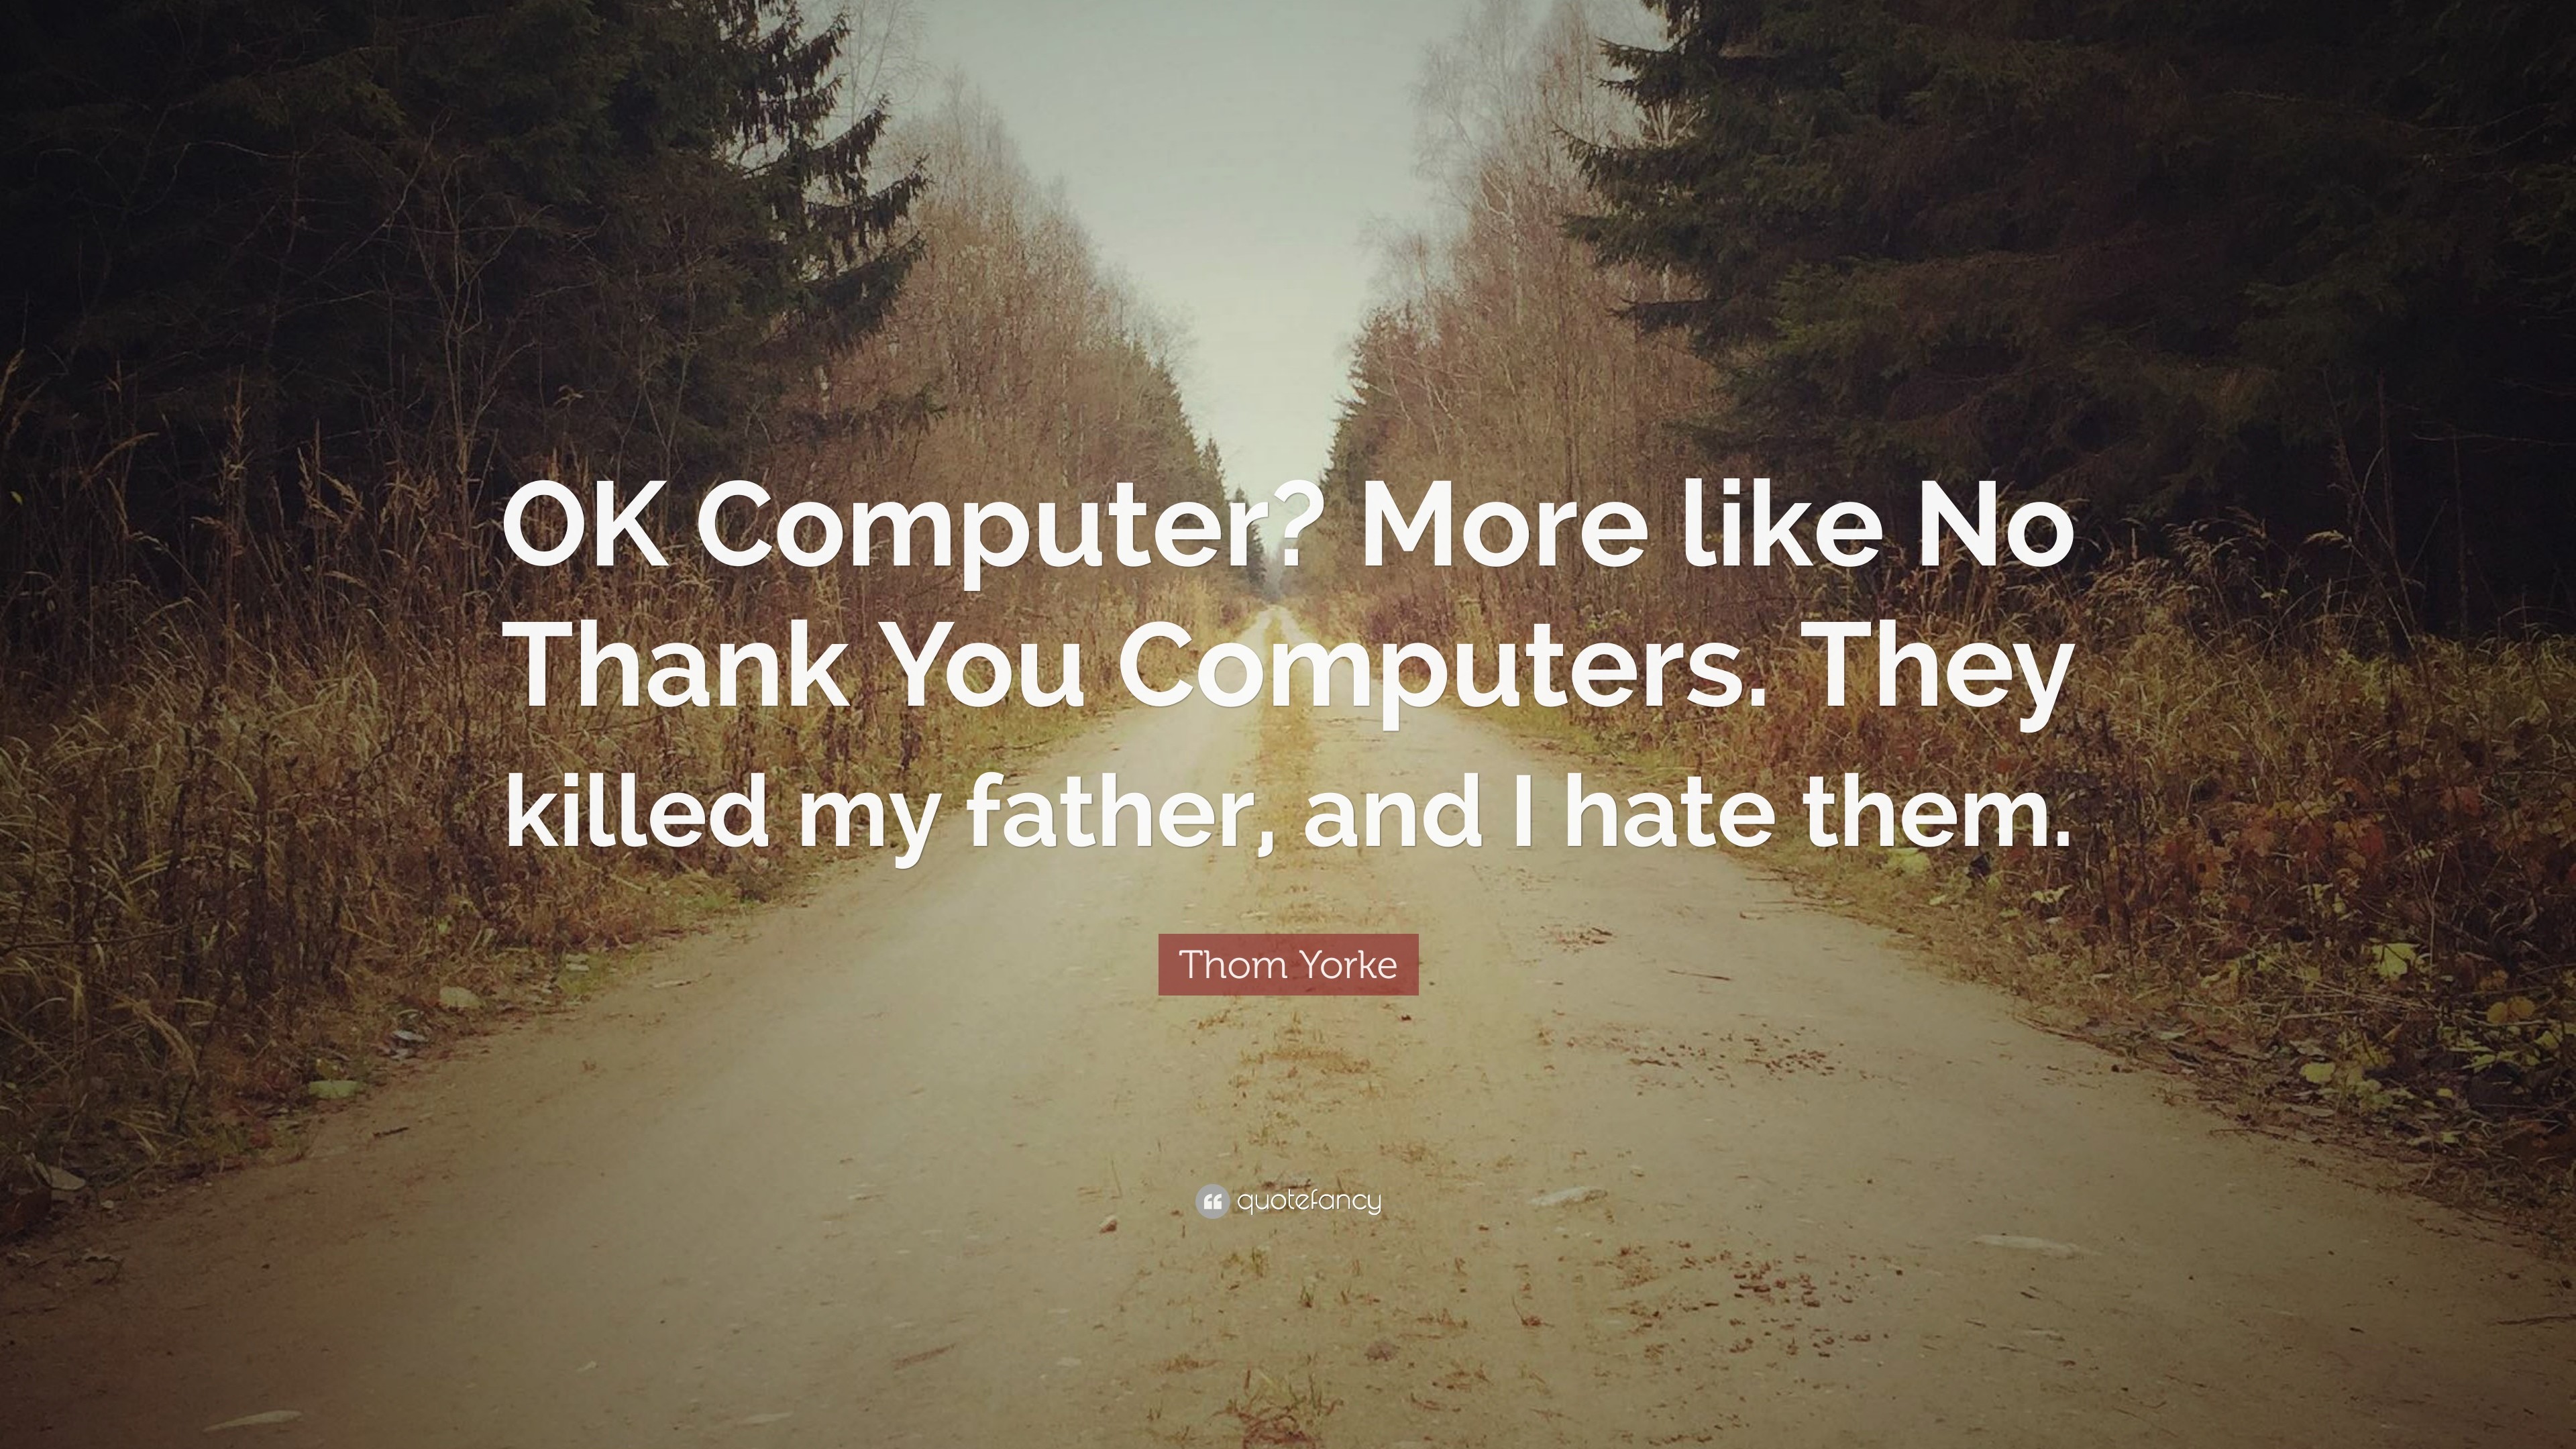 3840x2160 Thom Yorke Quote: “OK Computer? More like No Thank You Computers. They